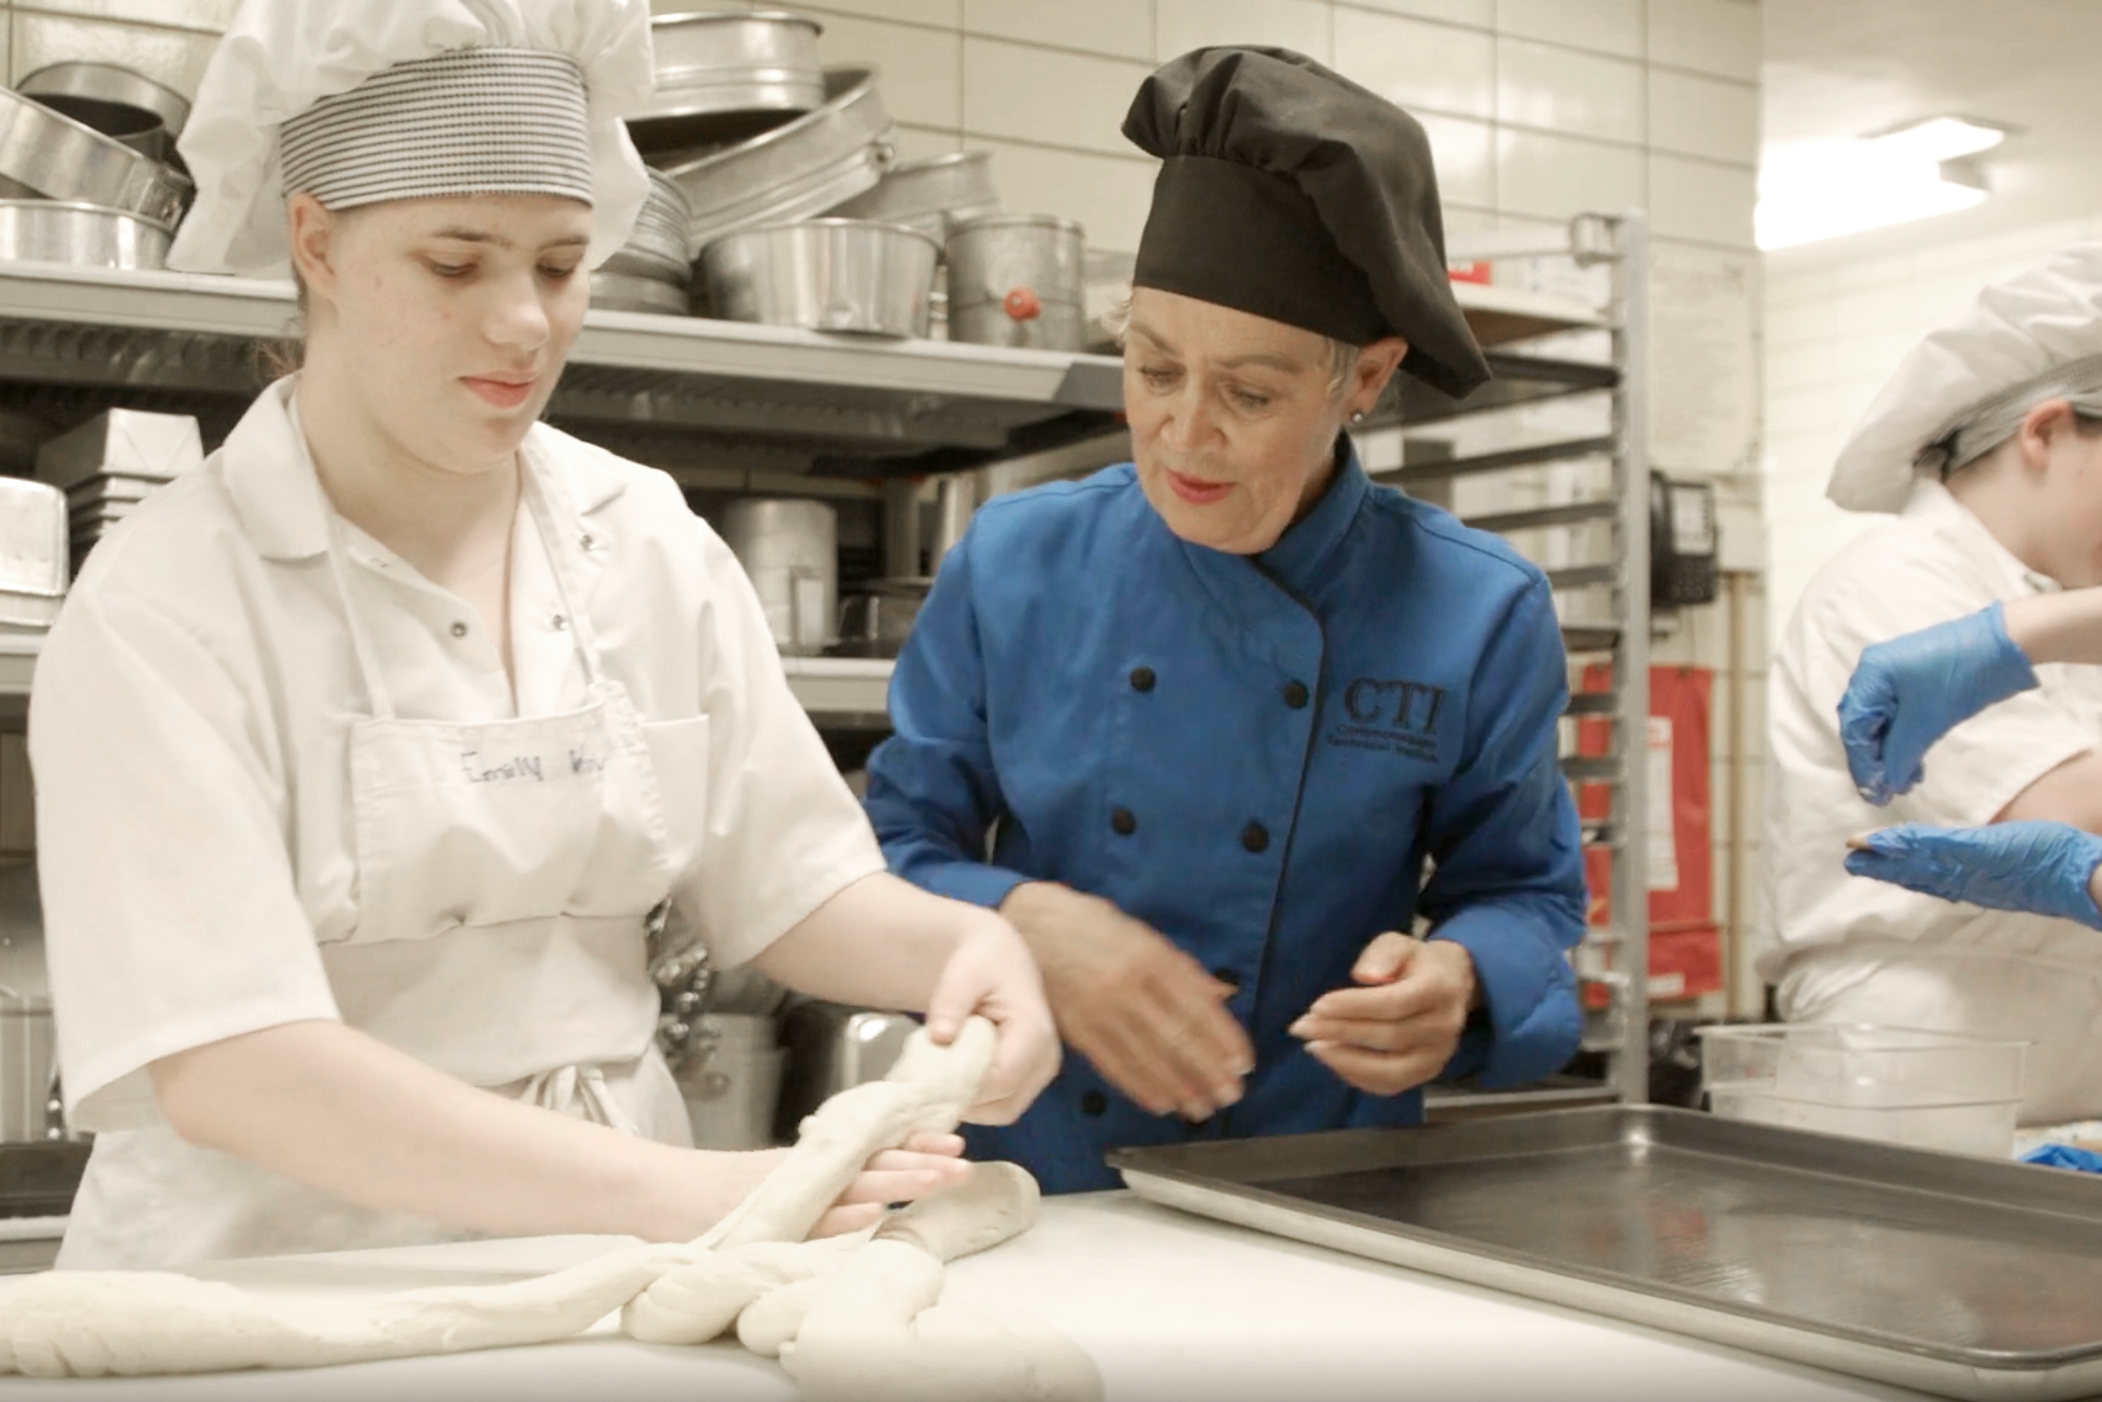 Culinary instructor overseeing student making bread